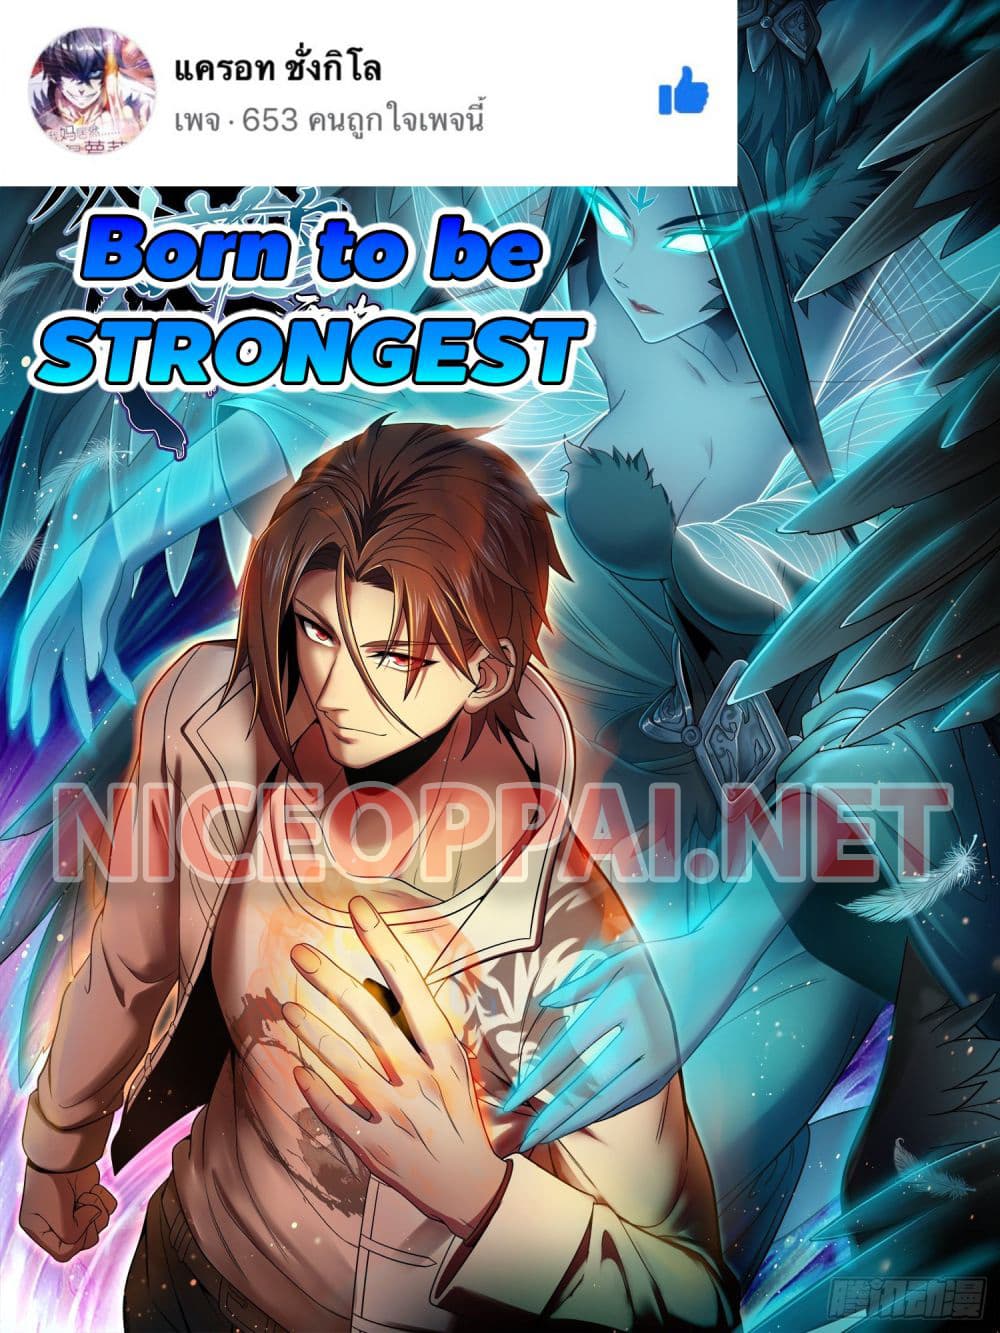 Born to be Strongest12 (1)